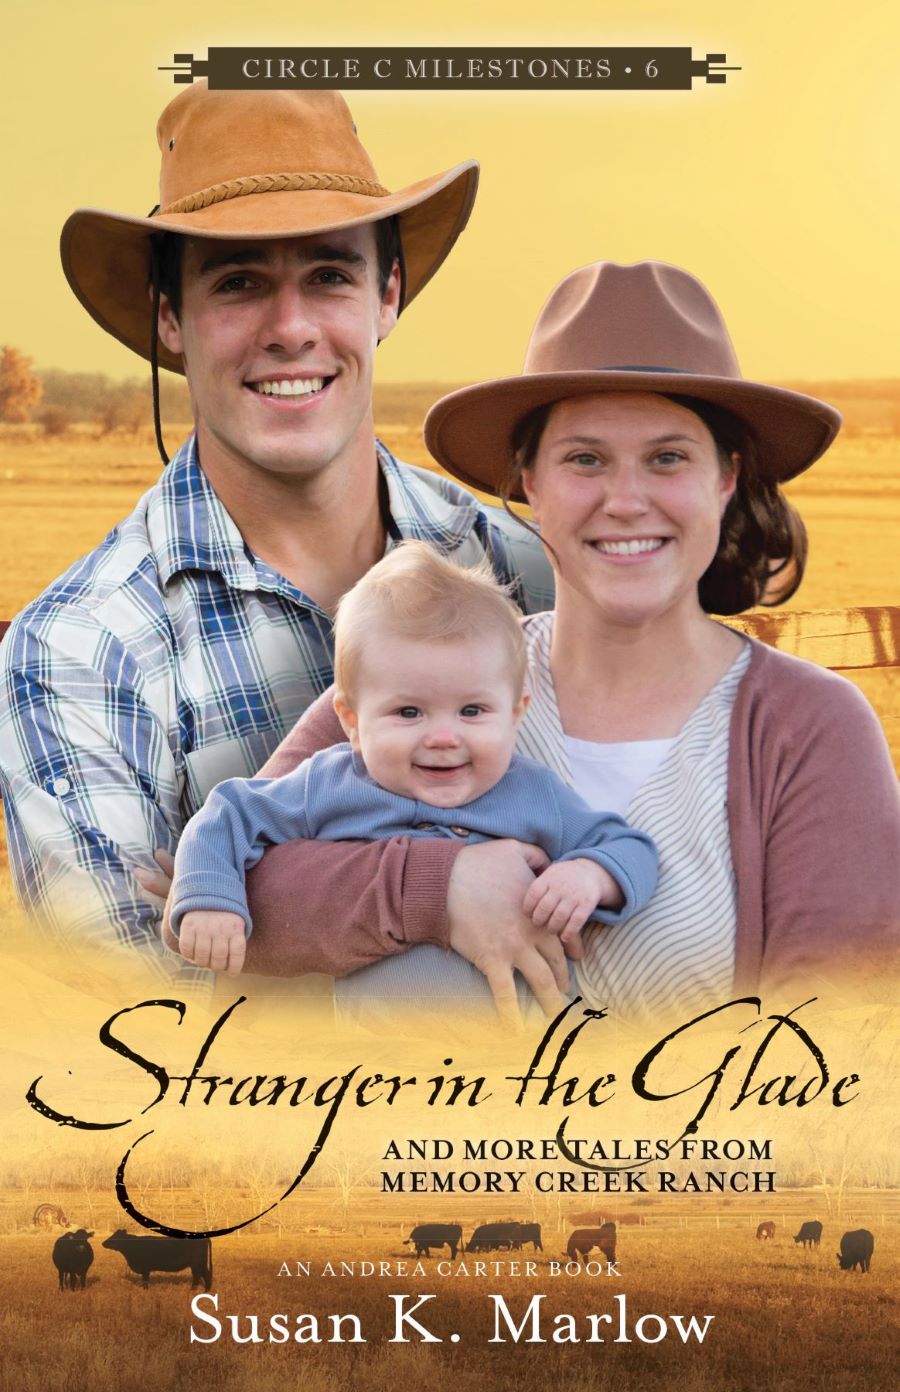 Front cover of Stranger in the Glade by Susan K. Marlow.